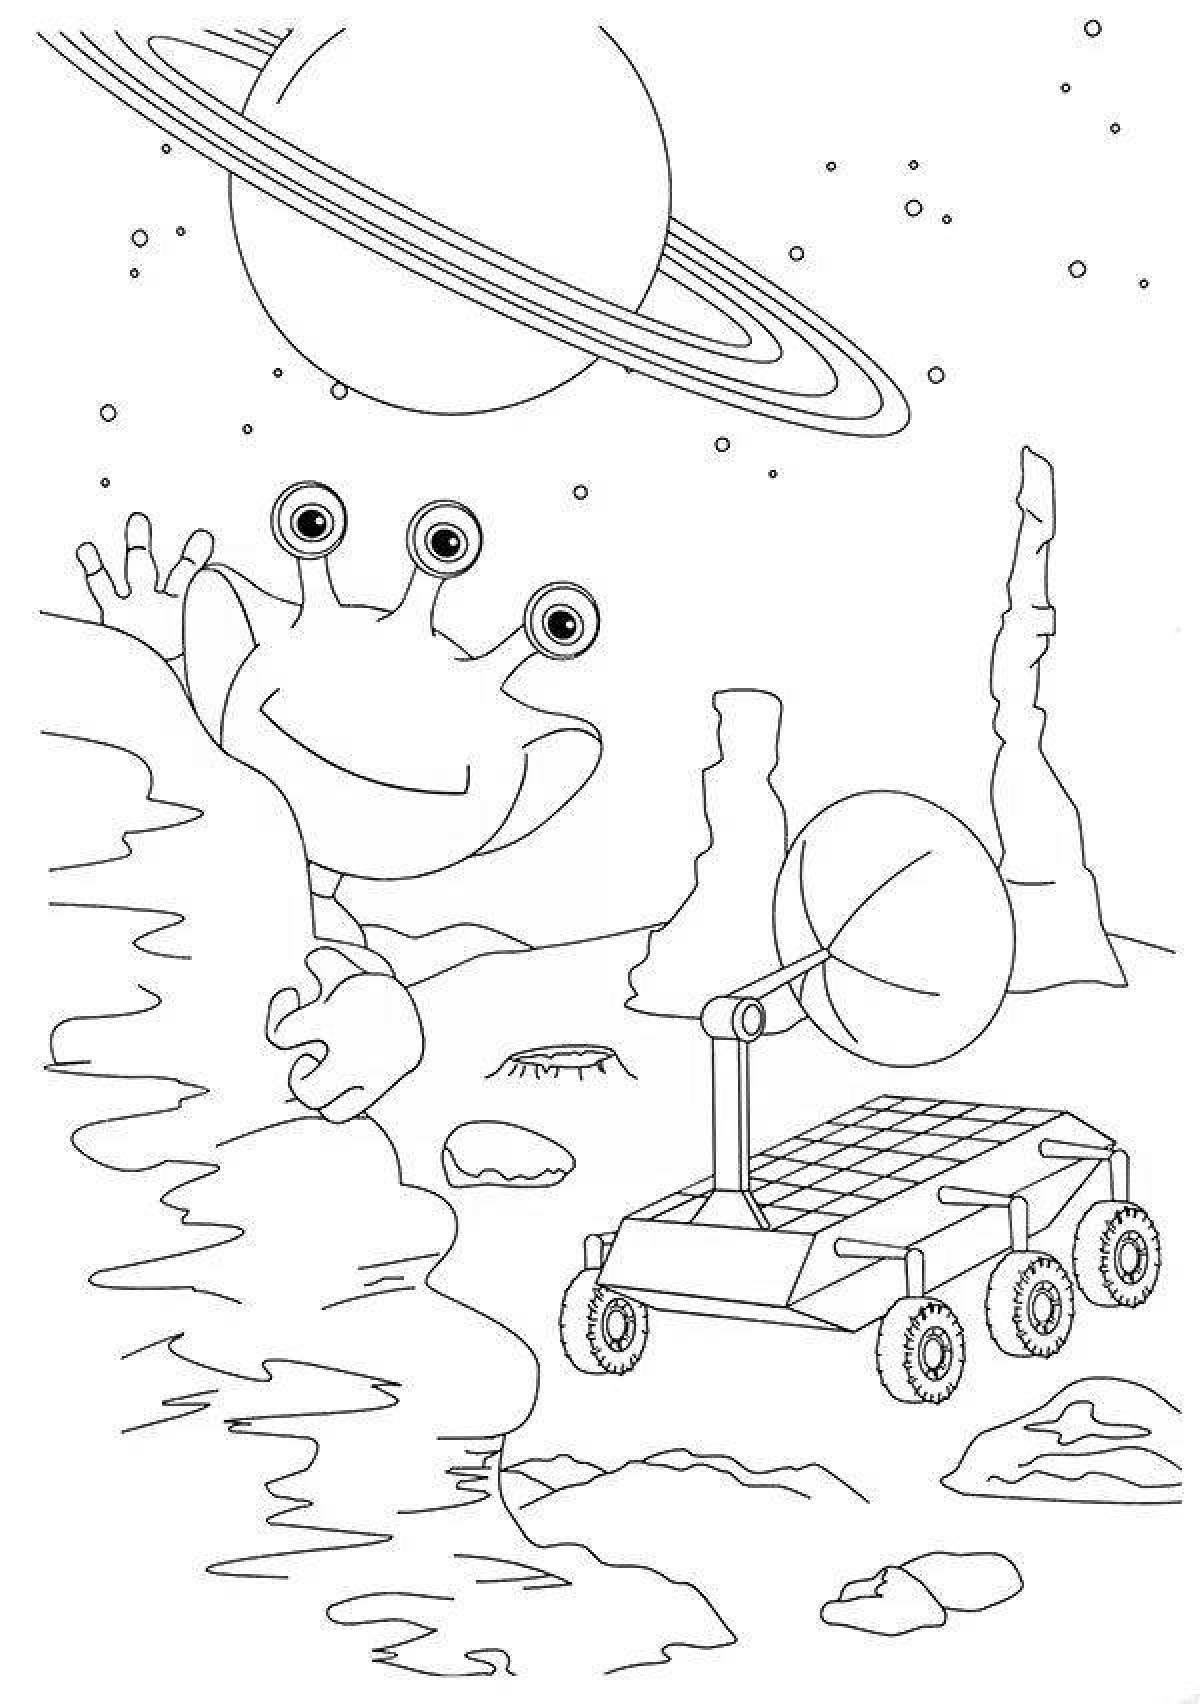 Majestic moon rover coloring page